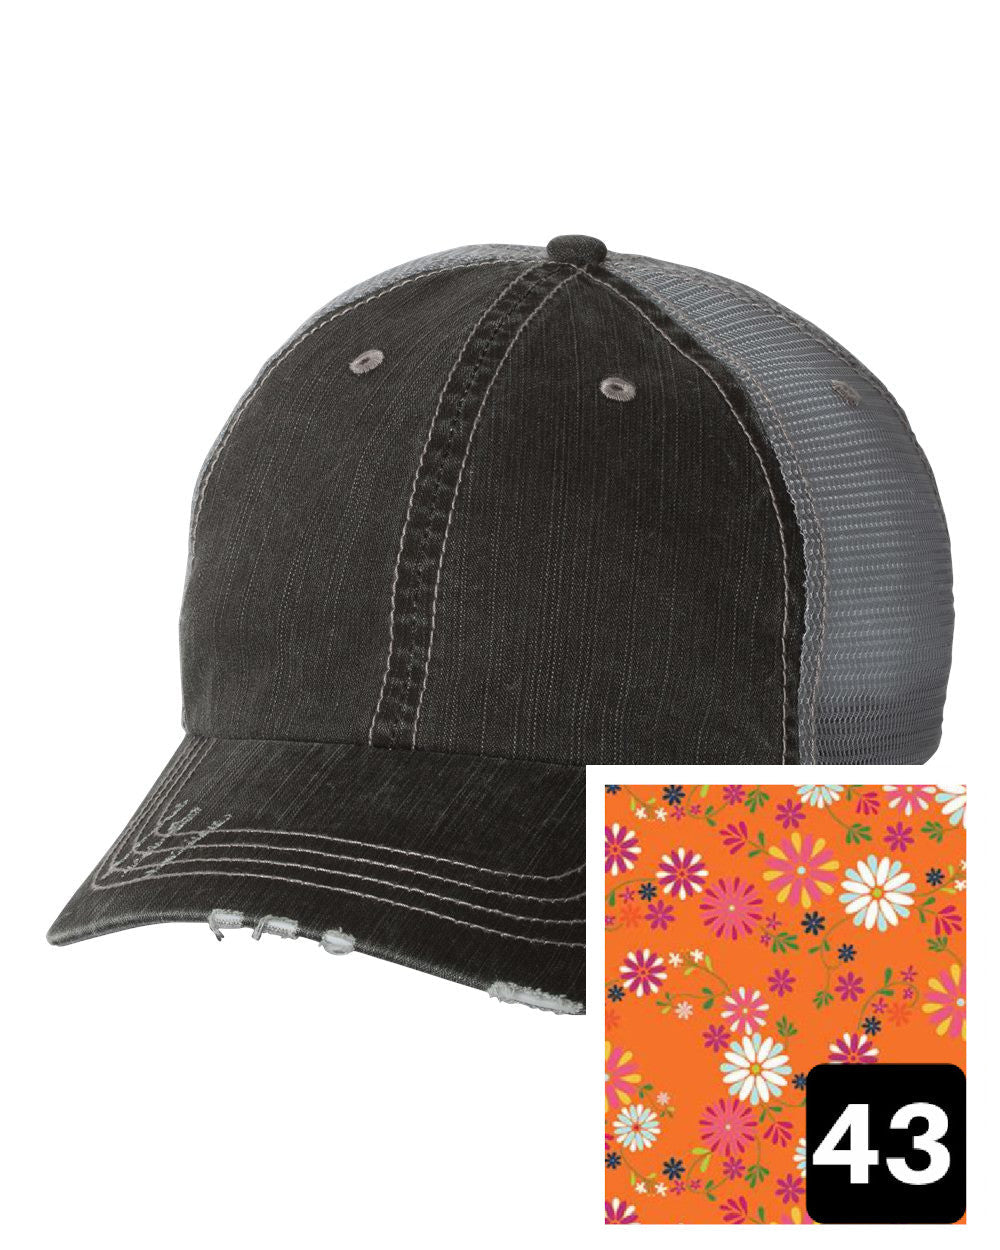 gray distressed trucker hat with black geometric fabric state of Hawaii